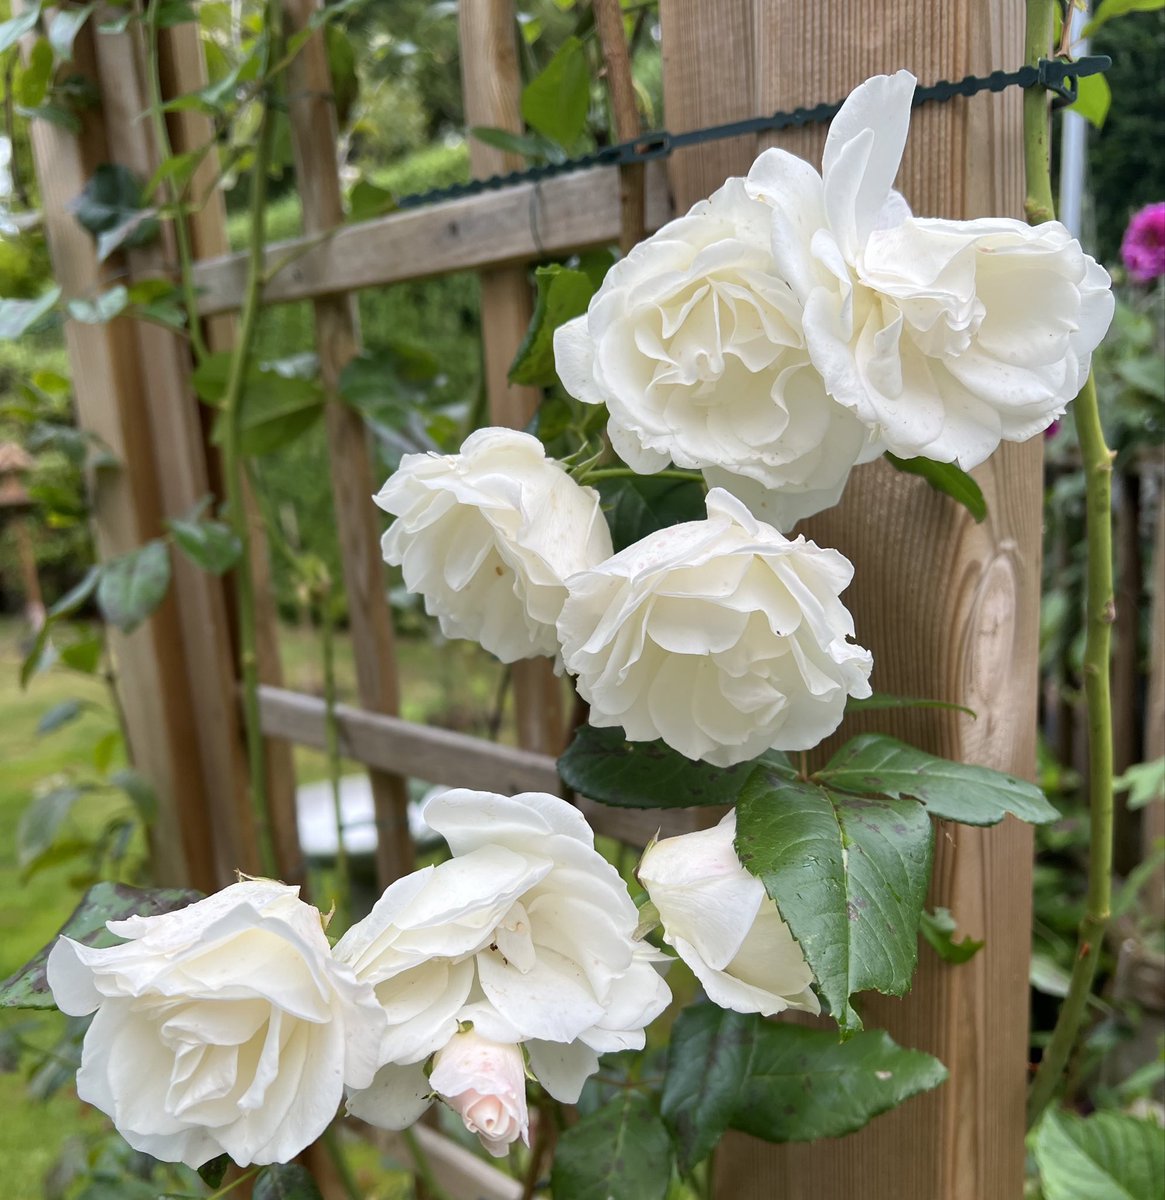 Day 7 of #ARoseADay for #Advent is the lovely Iceberg climber. Seems ages since I saw it flower with it being so cold now, but it’s lovely to be able to look back. Have a lovely day all, stay warm and dry ❄️🤍🌹 #mygarden #Roses23 #Advent2023 #ThursdayMotivation  #GardeningX